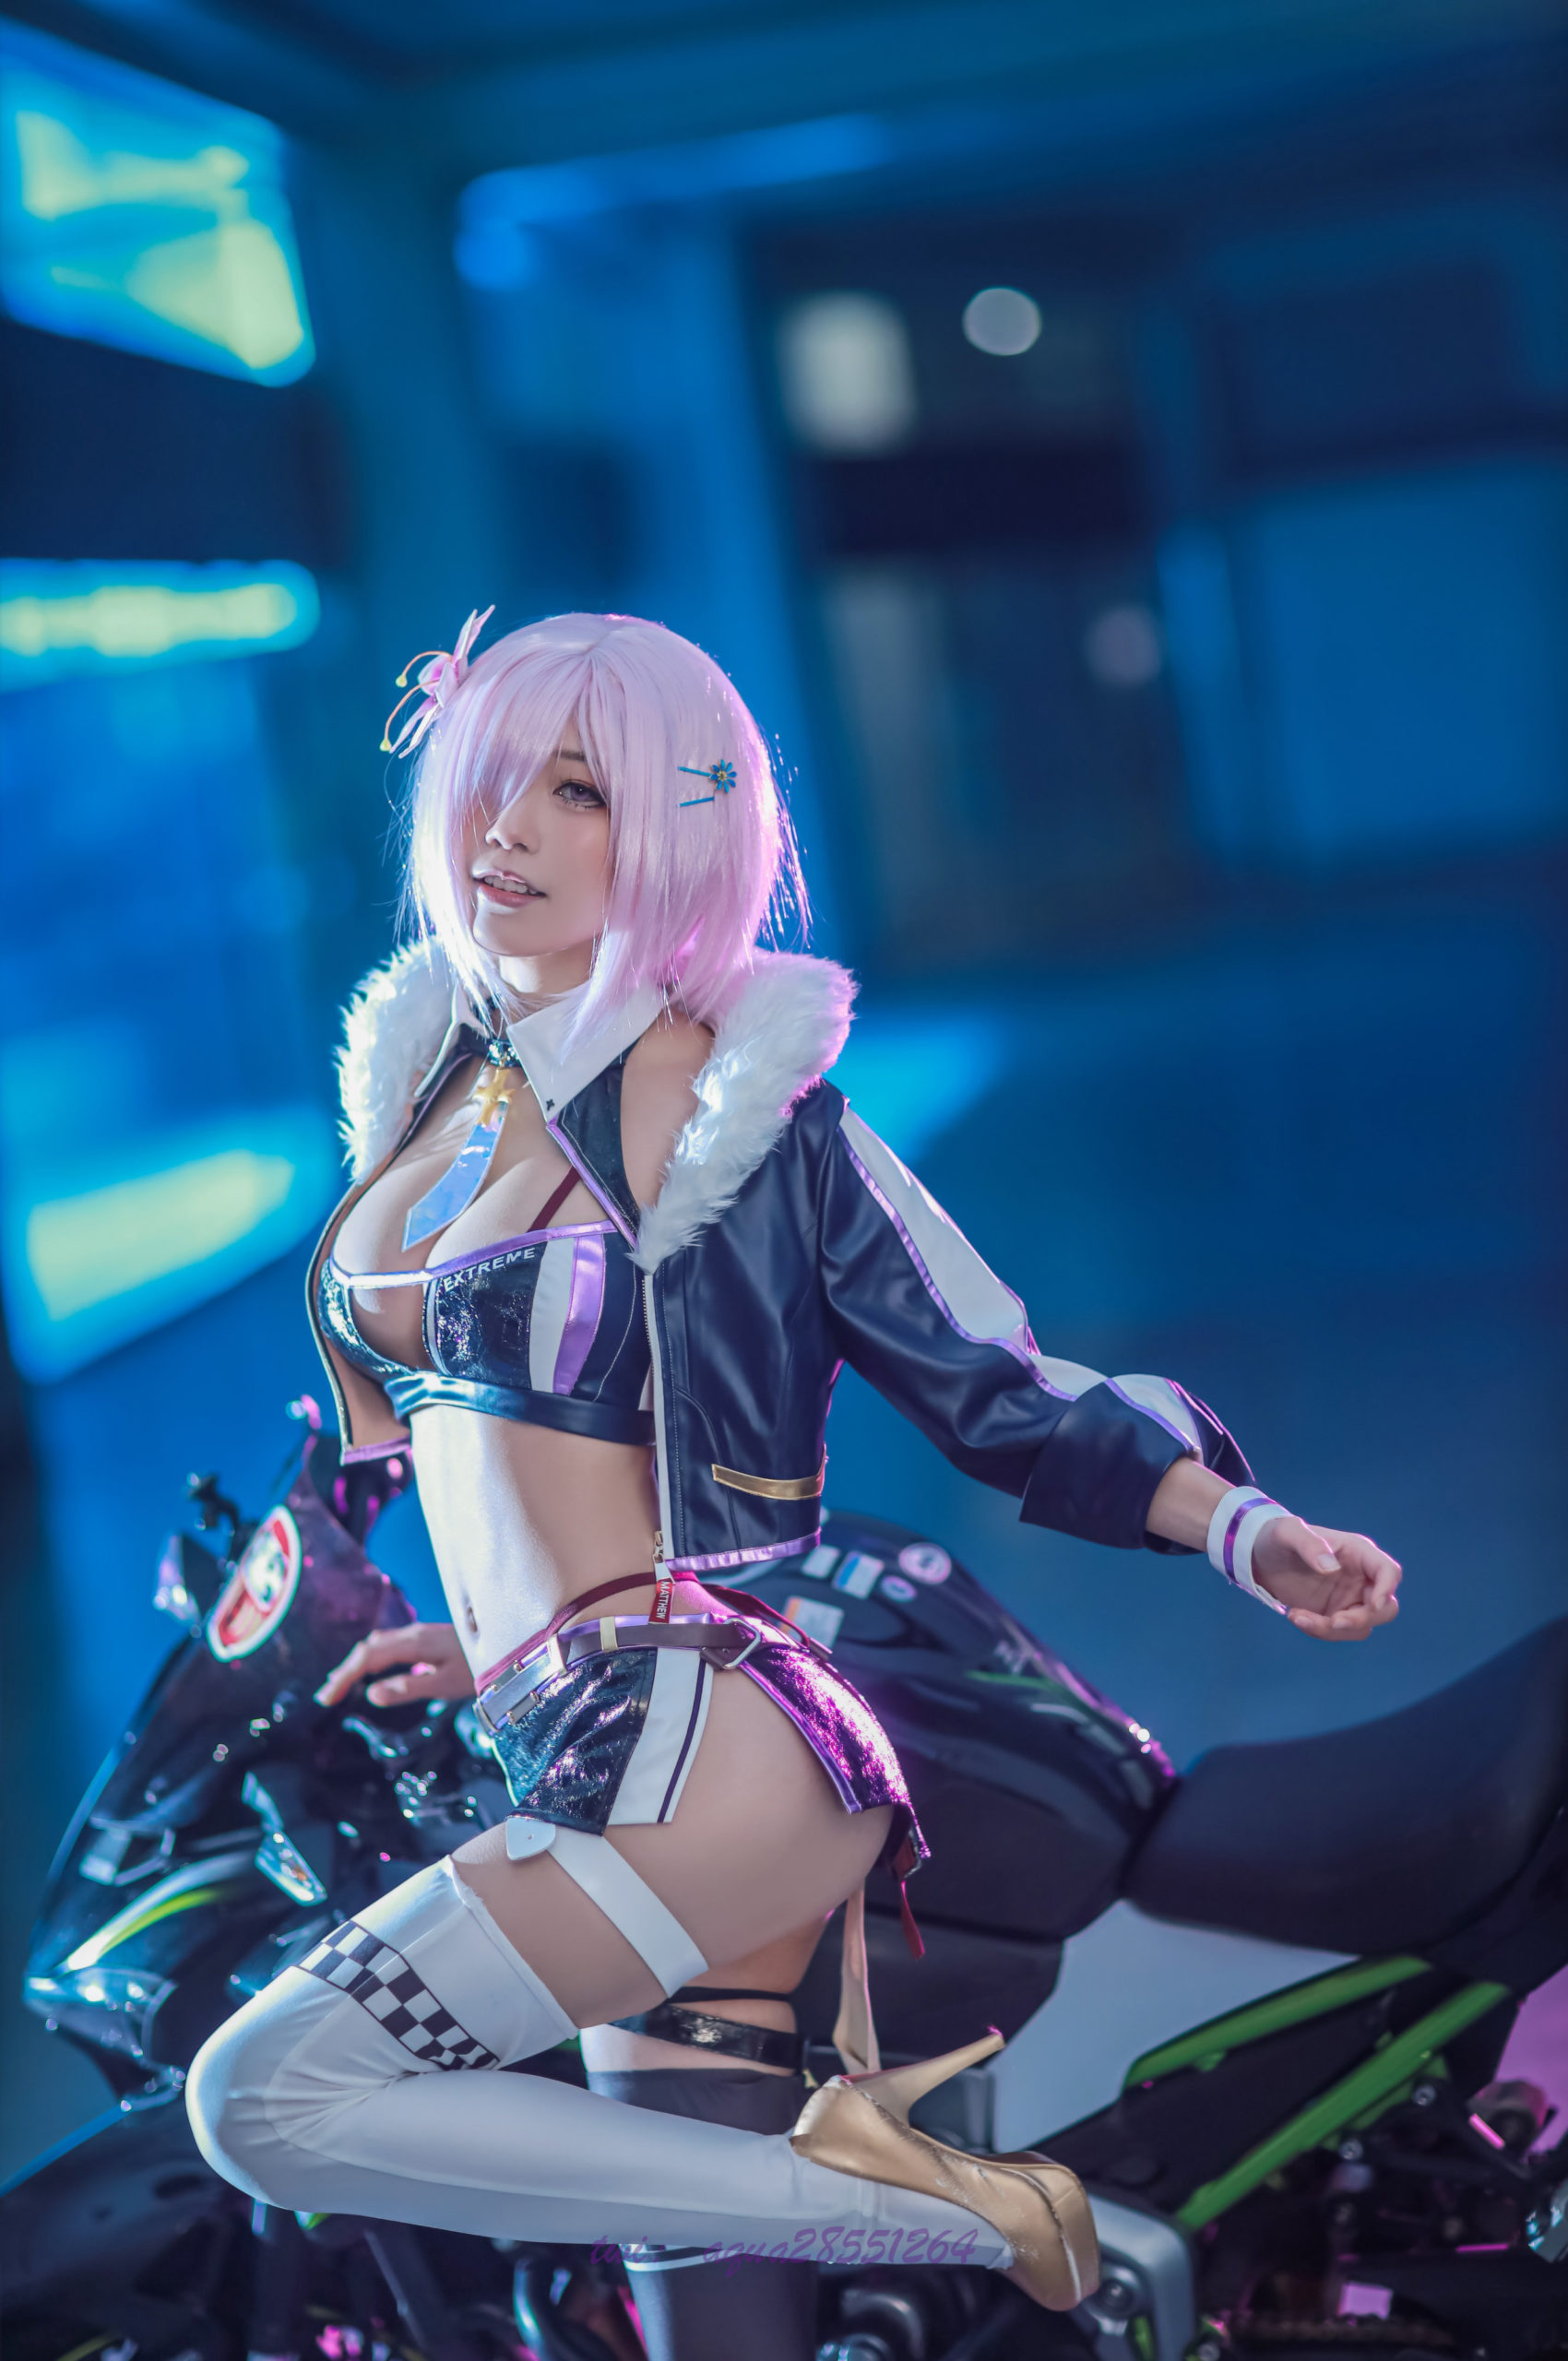 Get Your Heart Racing with These Sultry Kuroinu Cosplay Photos